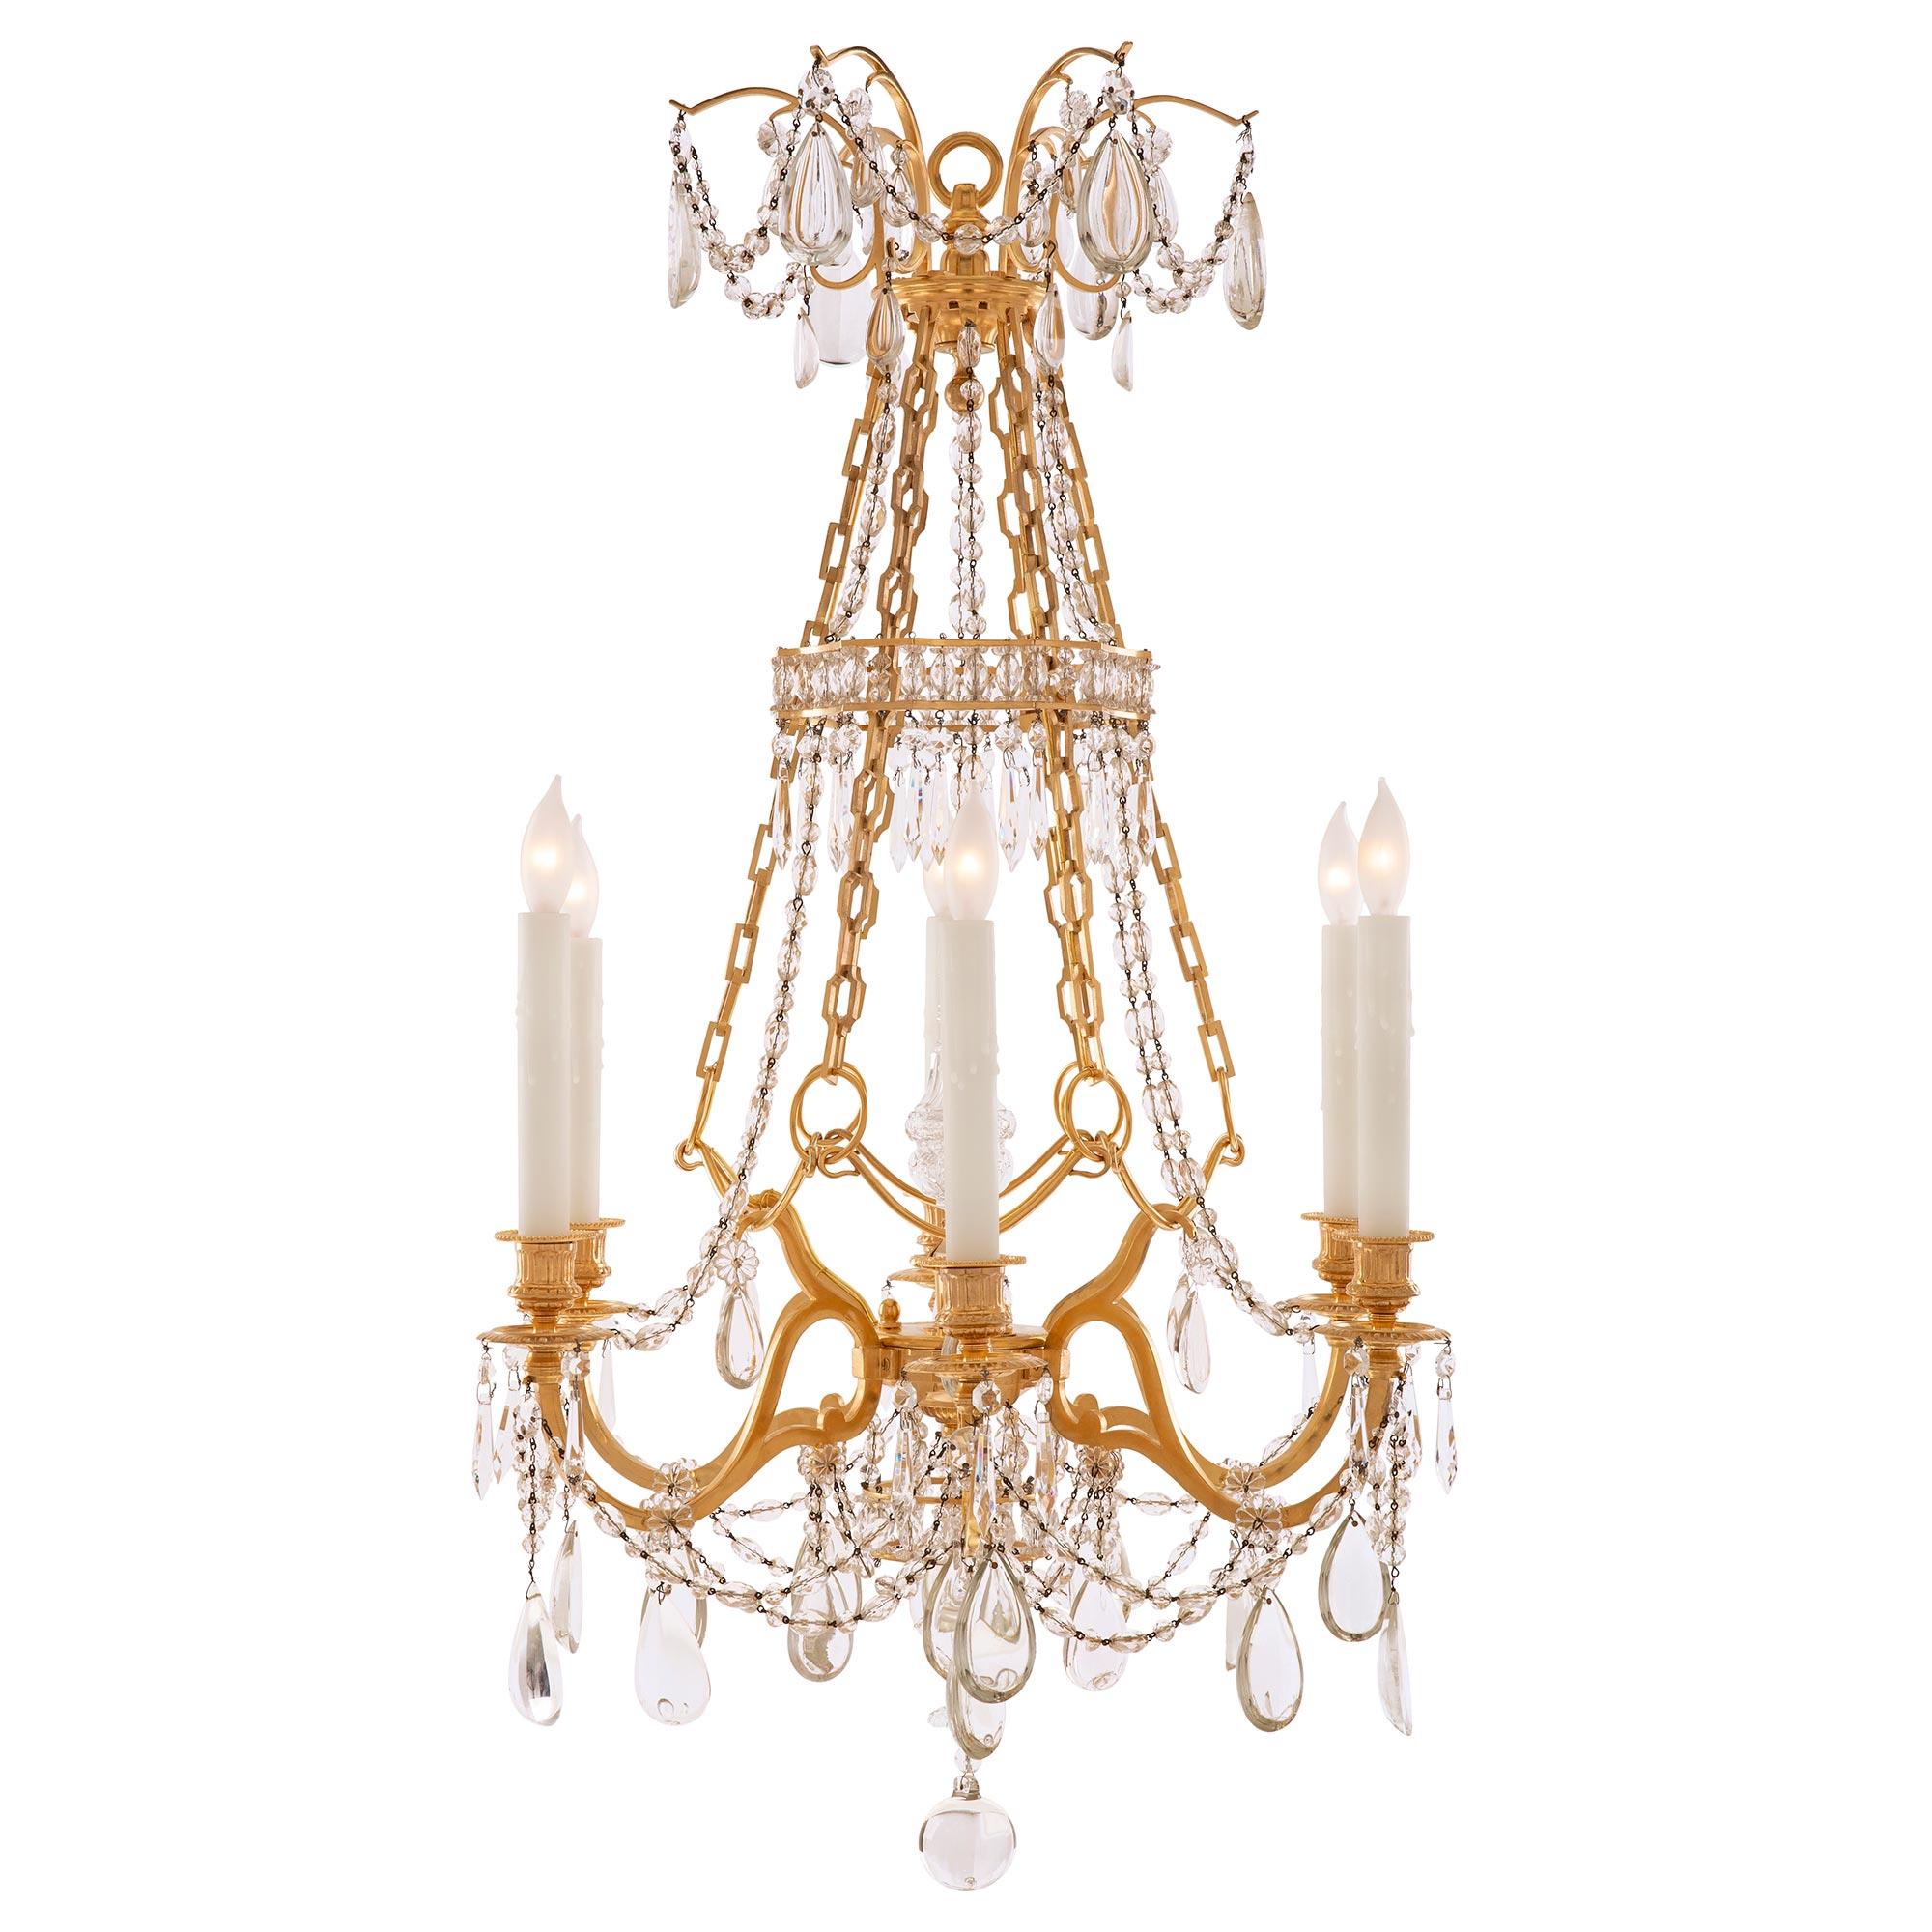 A beautiful and very high quality French 19th century Louis XVI st. ormolu and Baccarat crystal Marie Antoinette chandelier. The six arm chandelier is centered by a solid Baccarat crystal ball below a lower crown like ormolu and crystal pendant